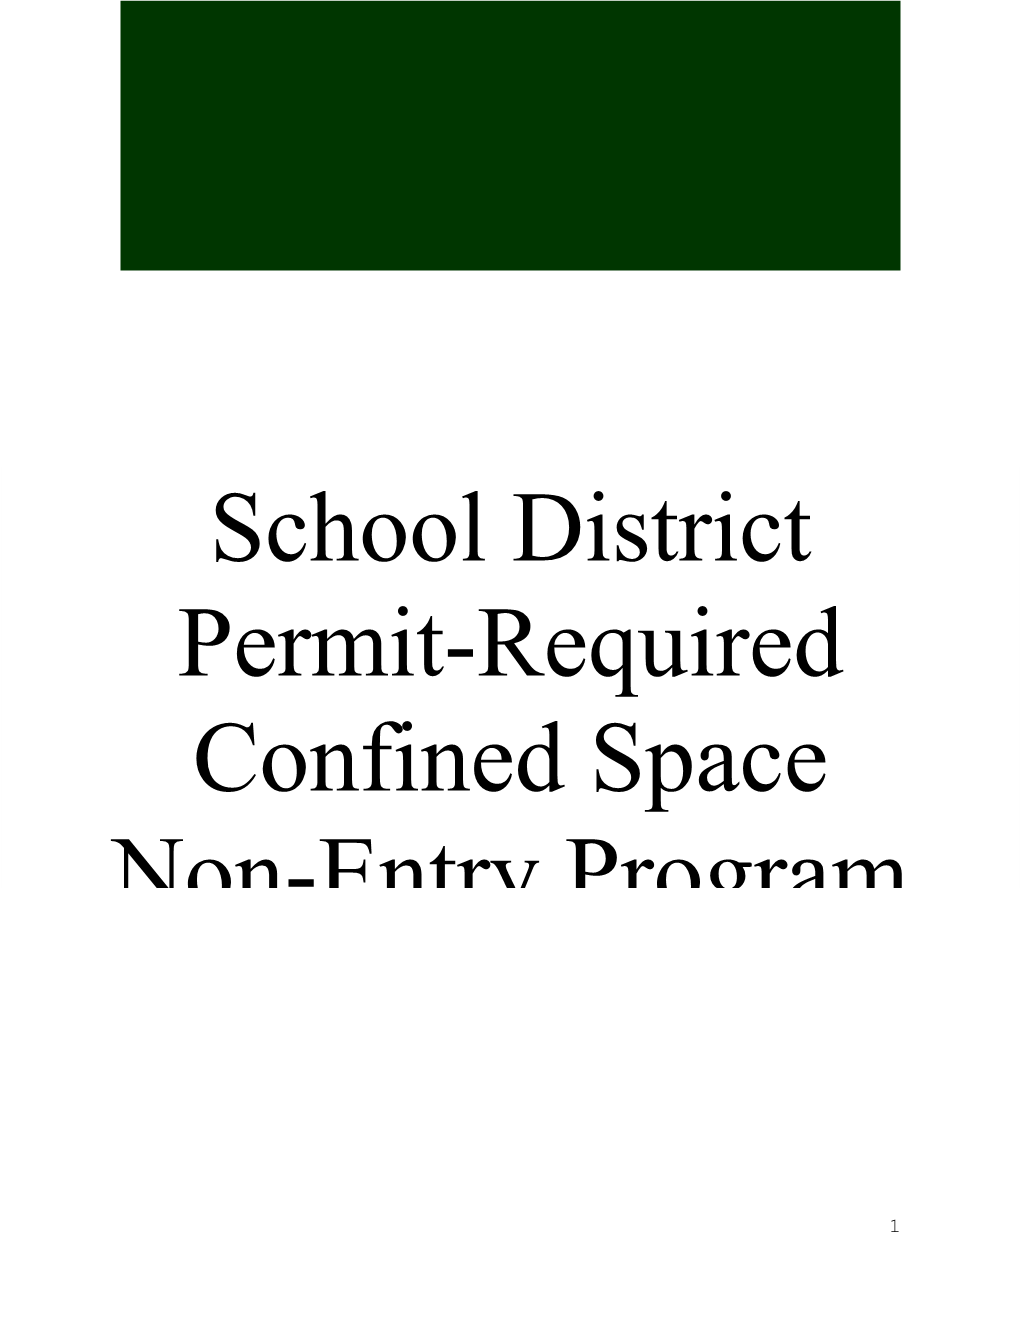 Permit-Required Confined Spacenon-Entry Program